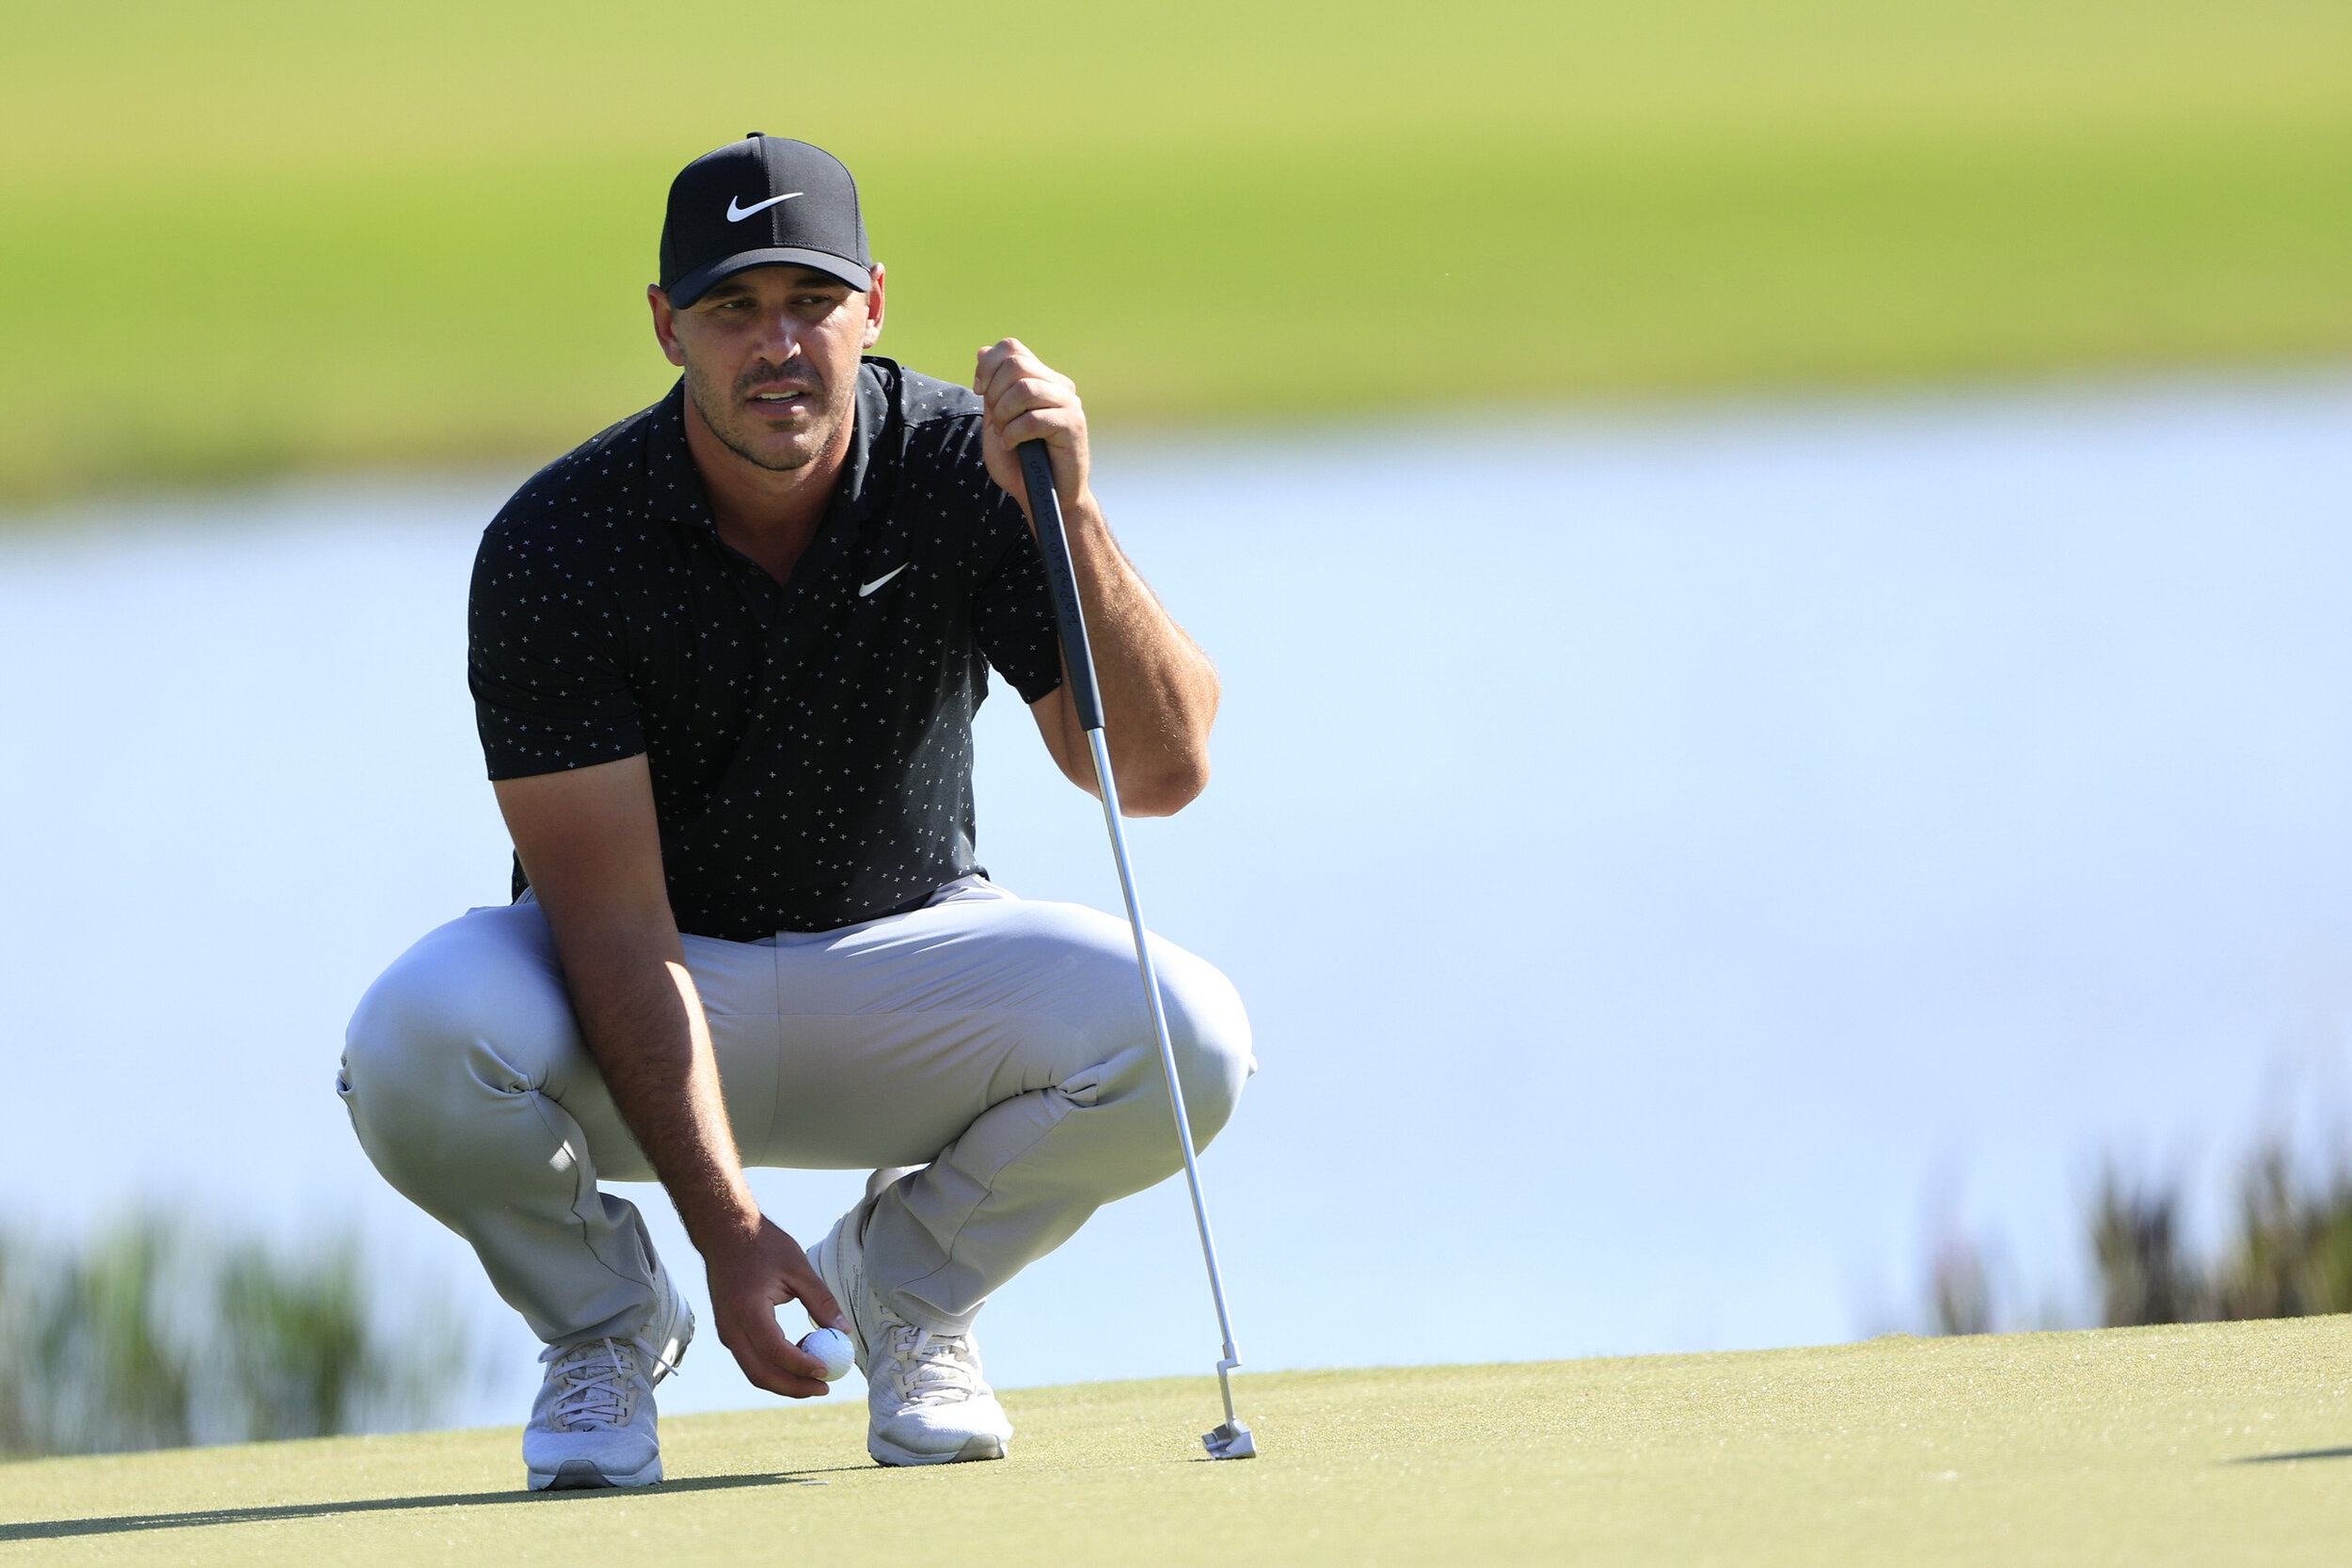  BRADENTON, FLORIDA - FEBRUARY 25: Brooks Koepka of the United States looks on from the fifth green during the first round of World Golf Championships-Workday Championship at The Concession on February 25, 2021 in Bradenton, Florida. (Photo by Sam Gr